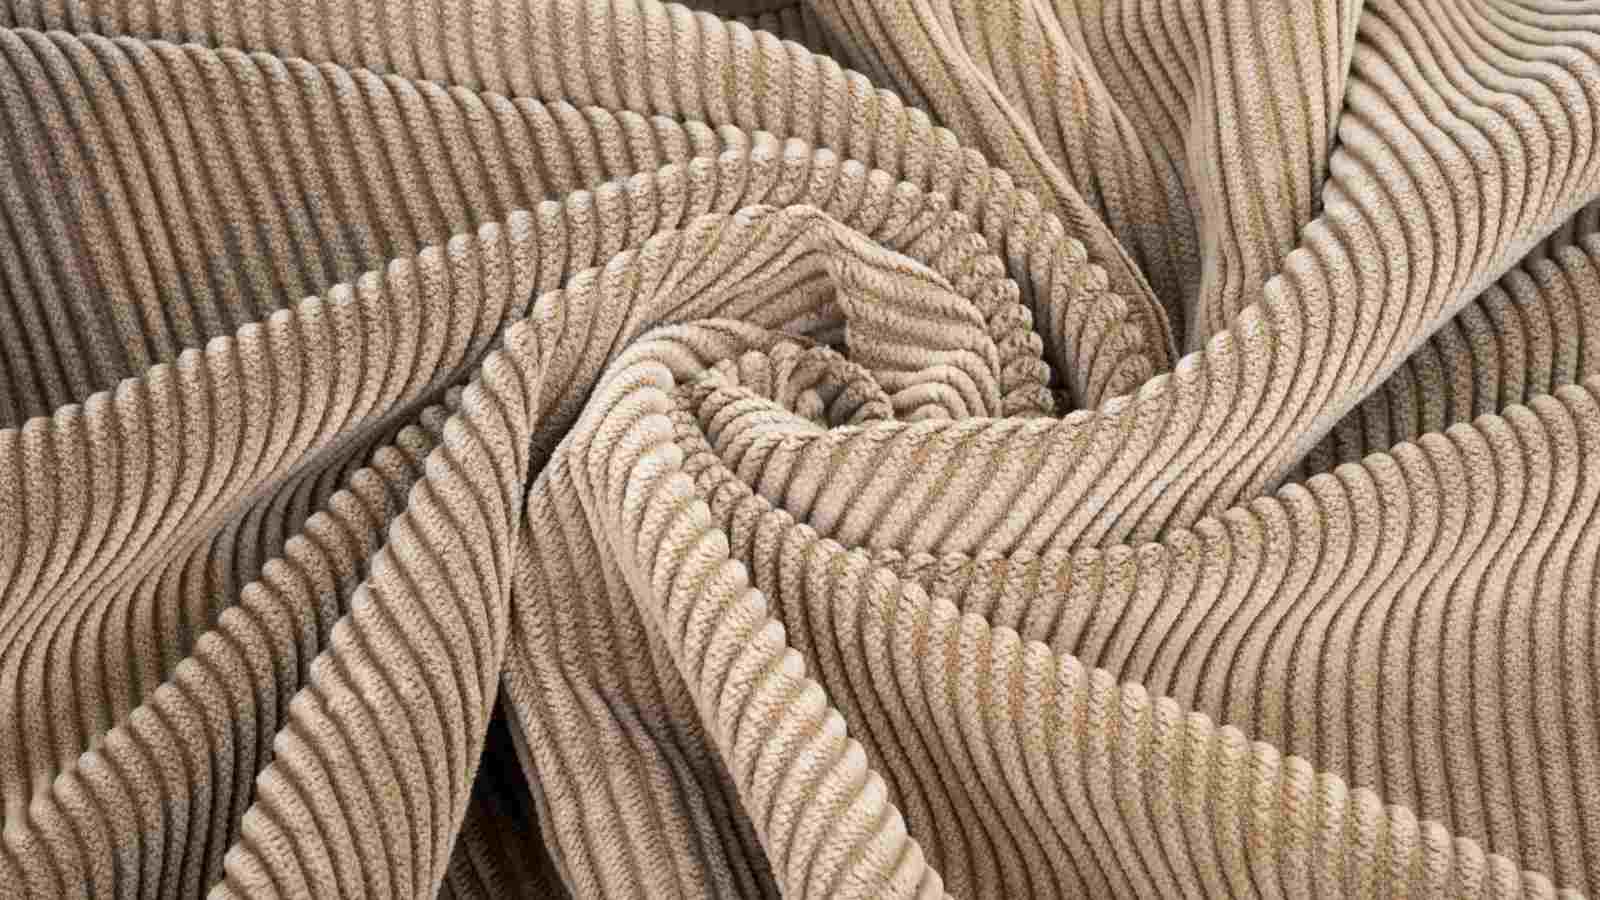 A close up image of a beige corduroy fabric.